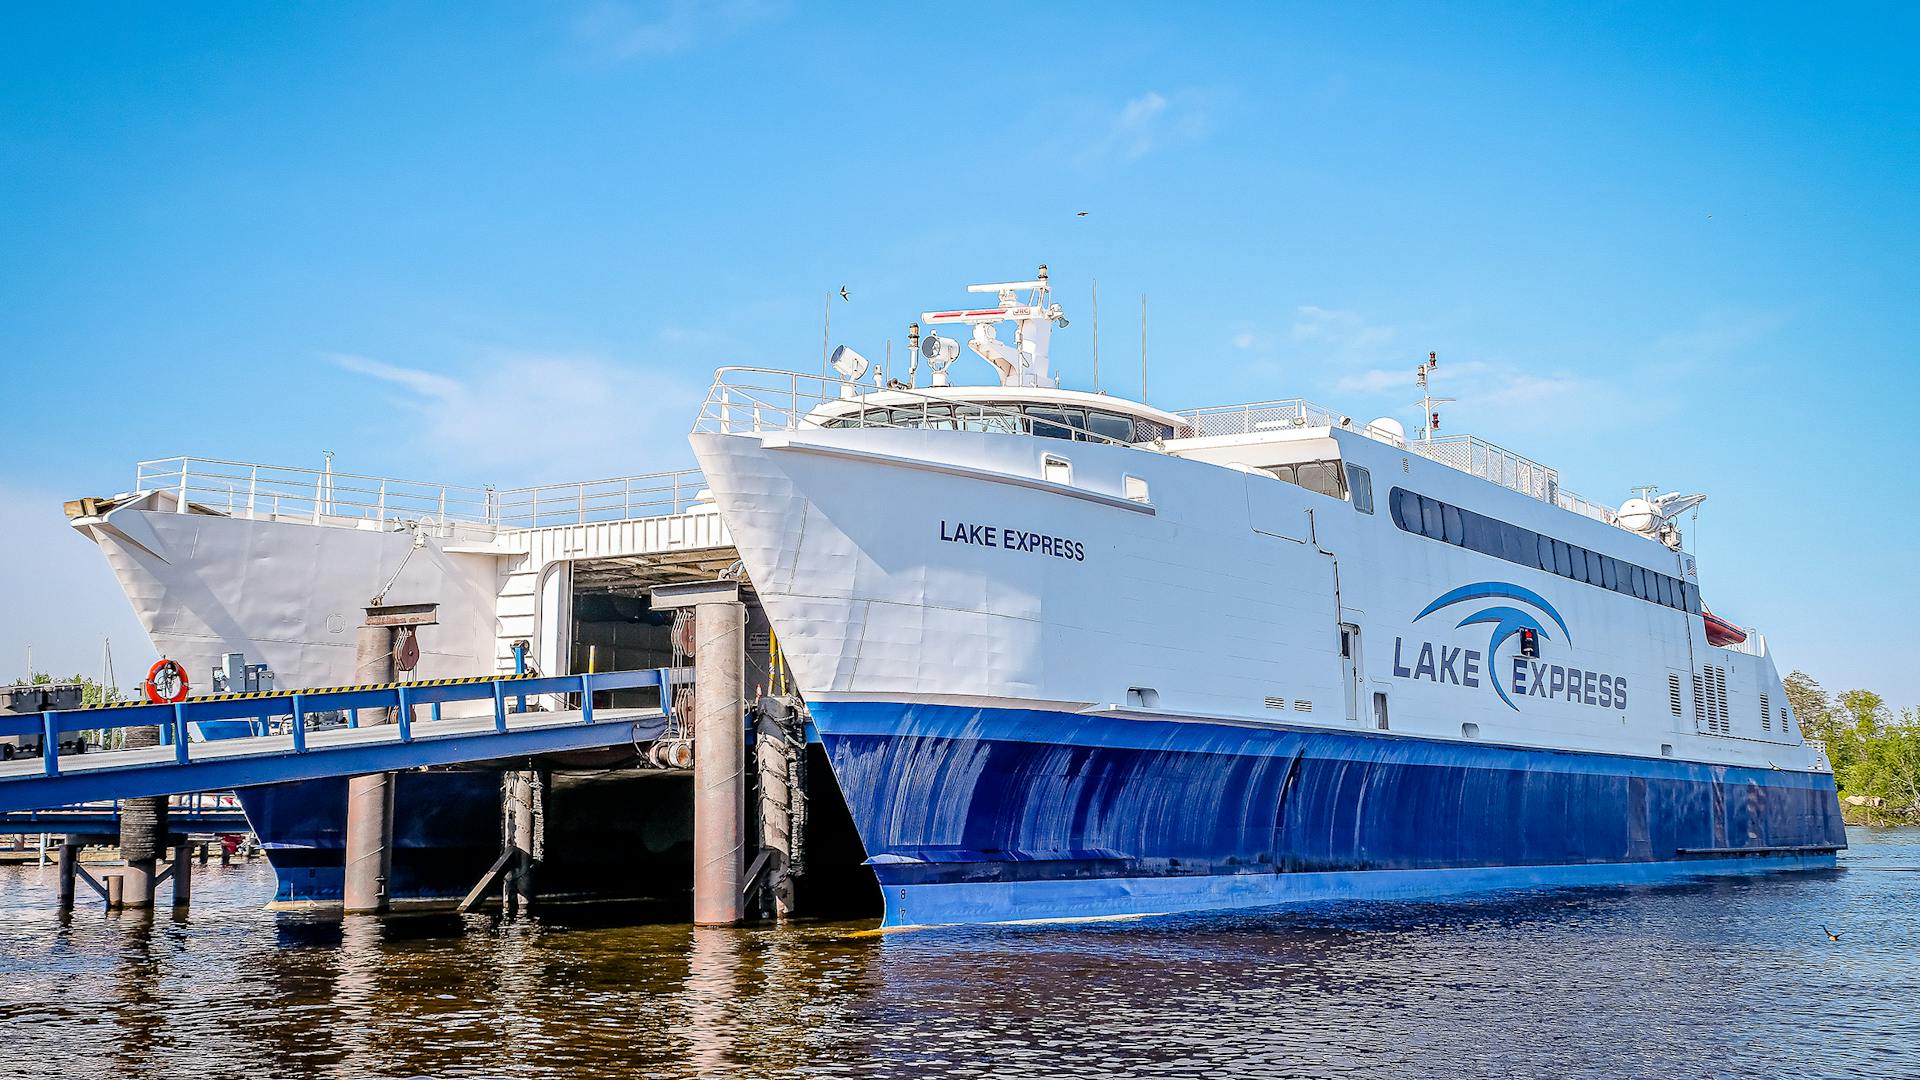 Lake Express ferry dock in Muskegon, Michigan (photo courtesy of Visit Muskegon)